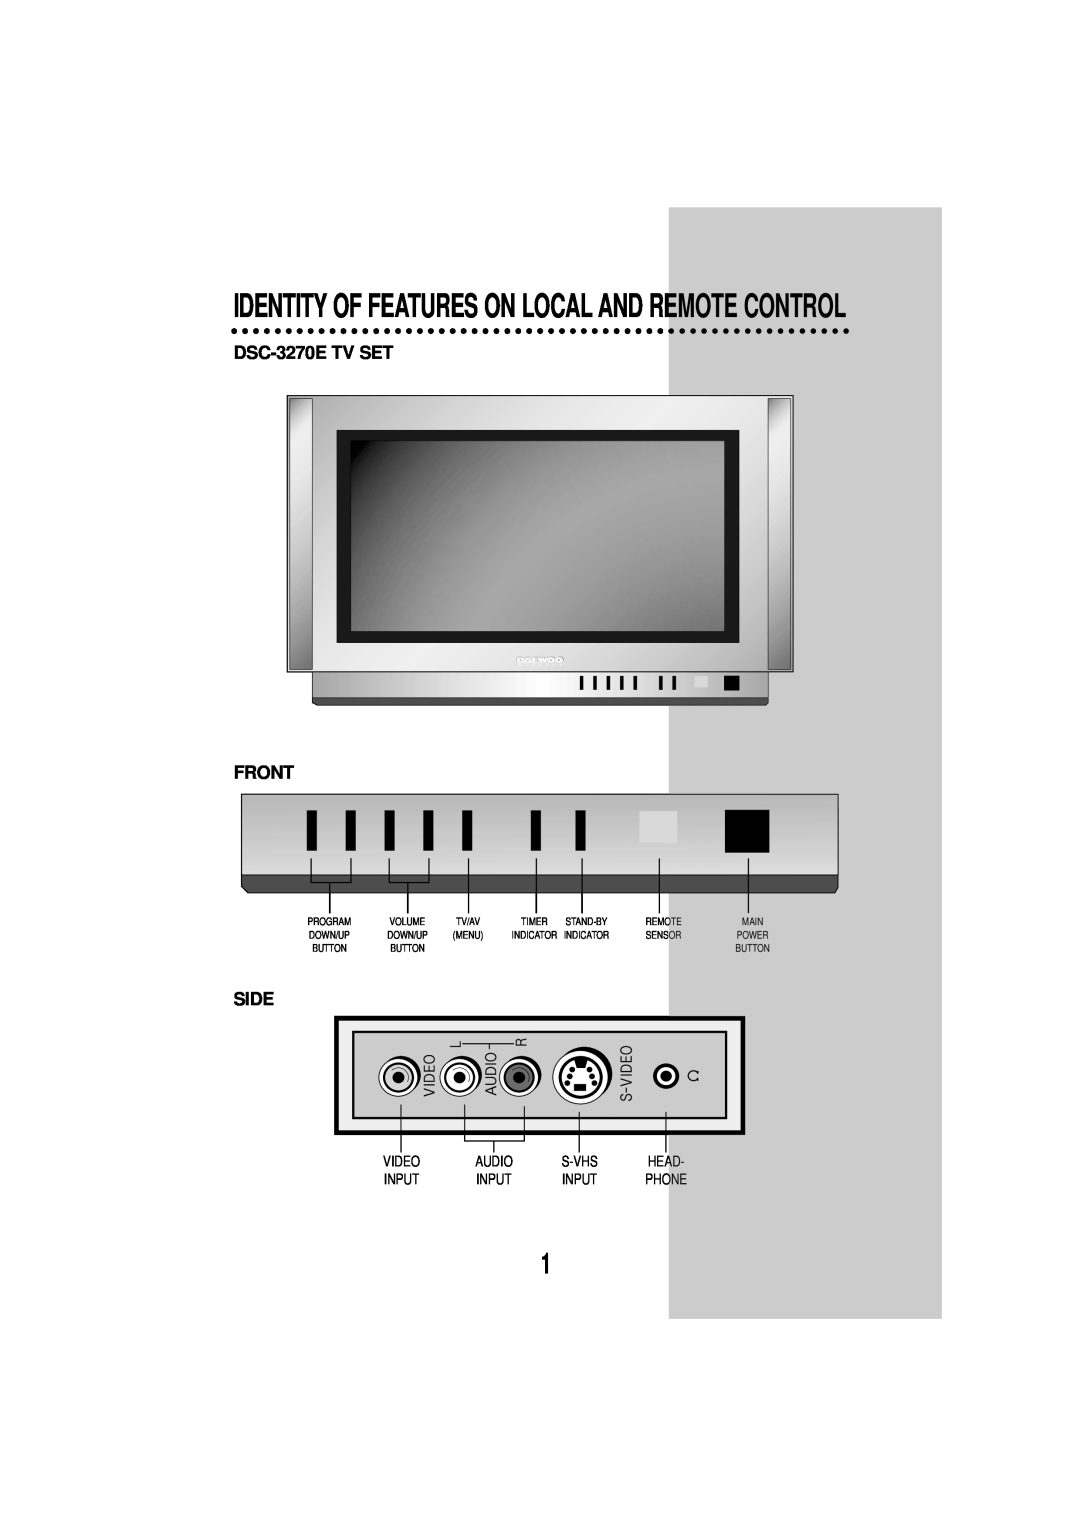 Daewoo Identity Of Features On Local And Remote Control, DSC-3270E TV SET FRONT, Side, Sensor, Head, Phone 